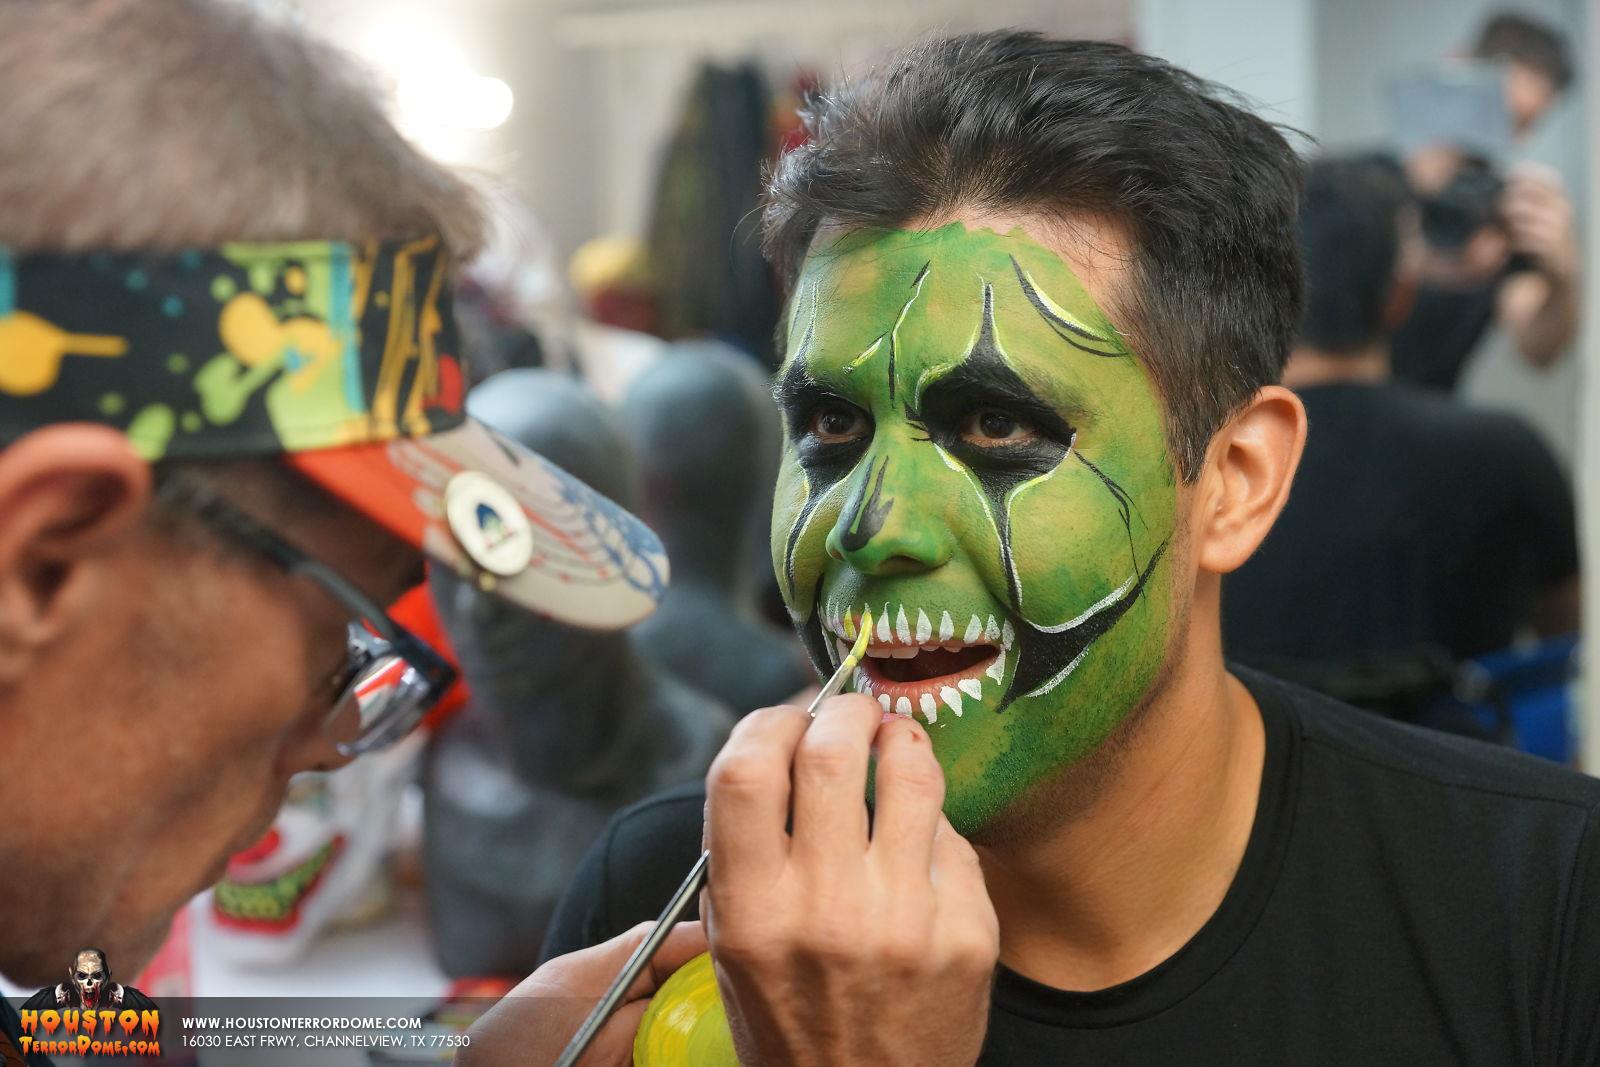 Ruben Galvan of Channel 2 KPRC gets teeth painted on his lips at Houston Terror Dome Haunted House.